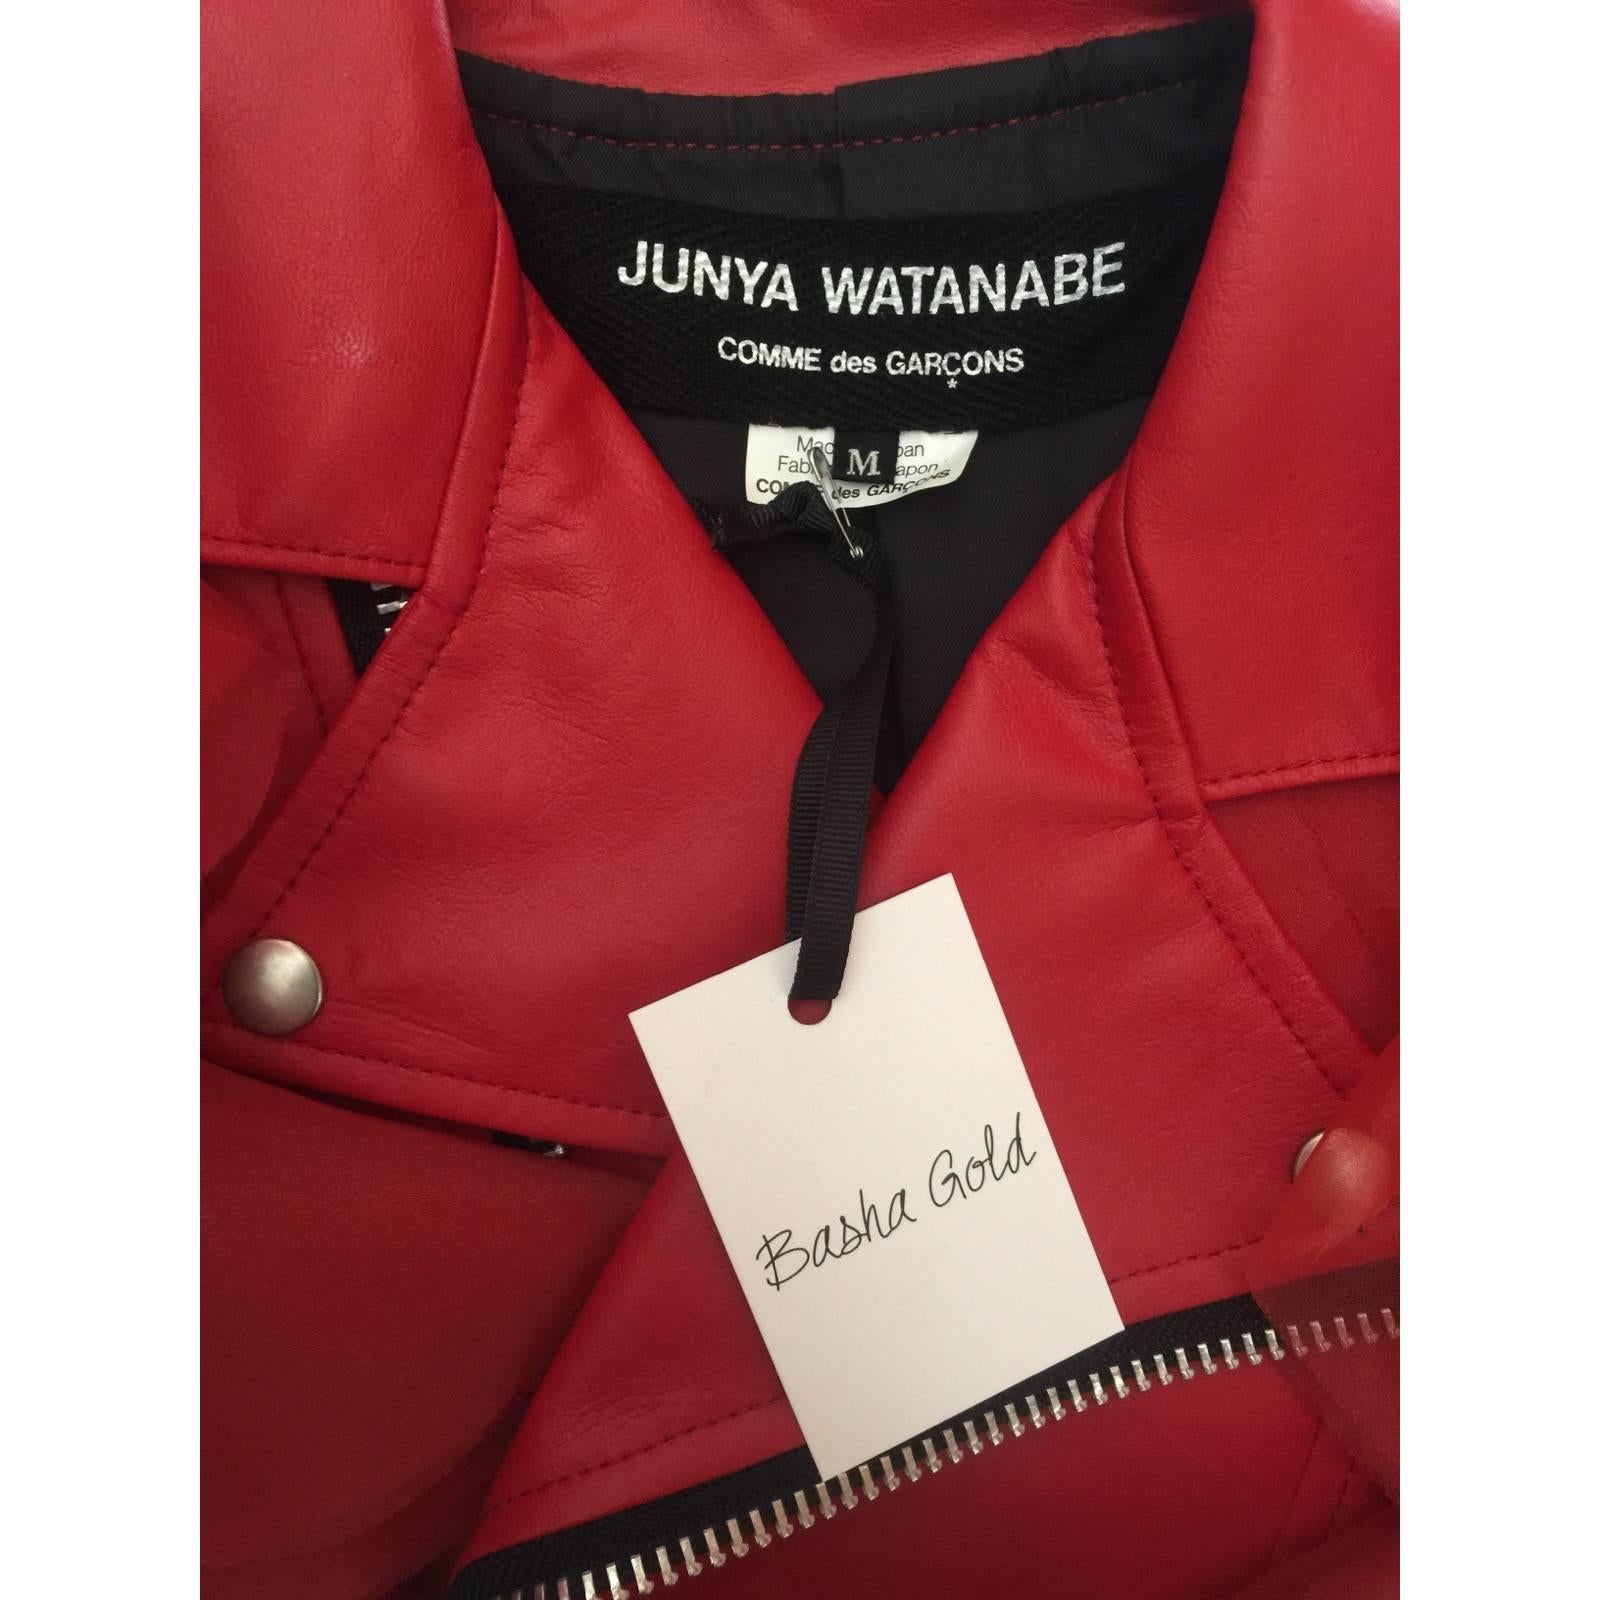 2012 Junya Watanabe Comme Des Garcons Red Faux Leather Ruffle Cropped Jacket 5